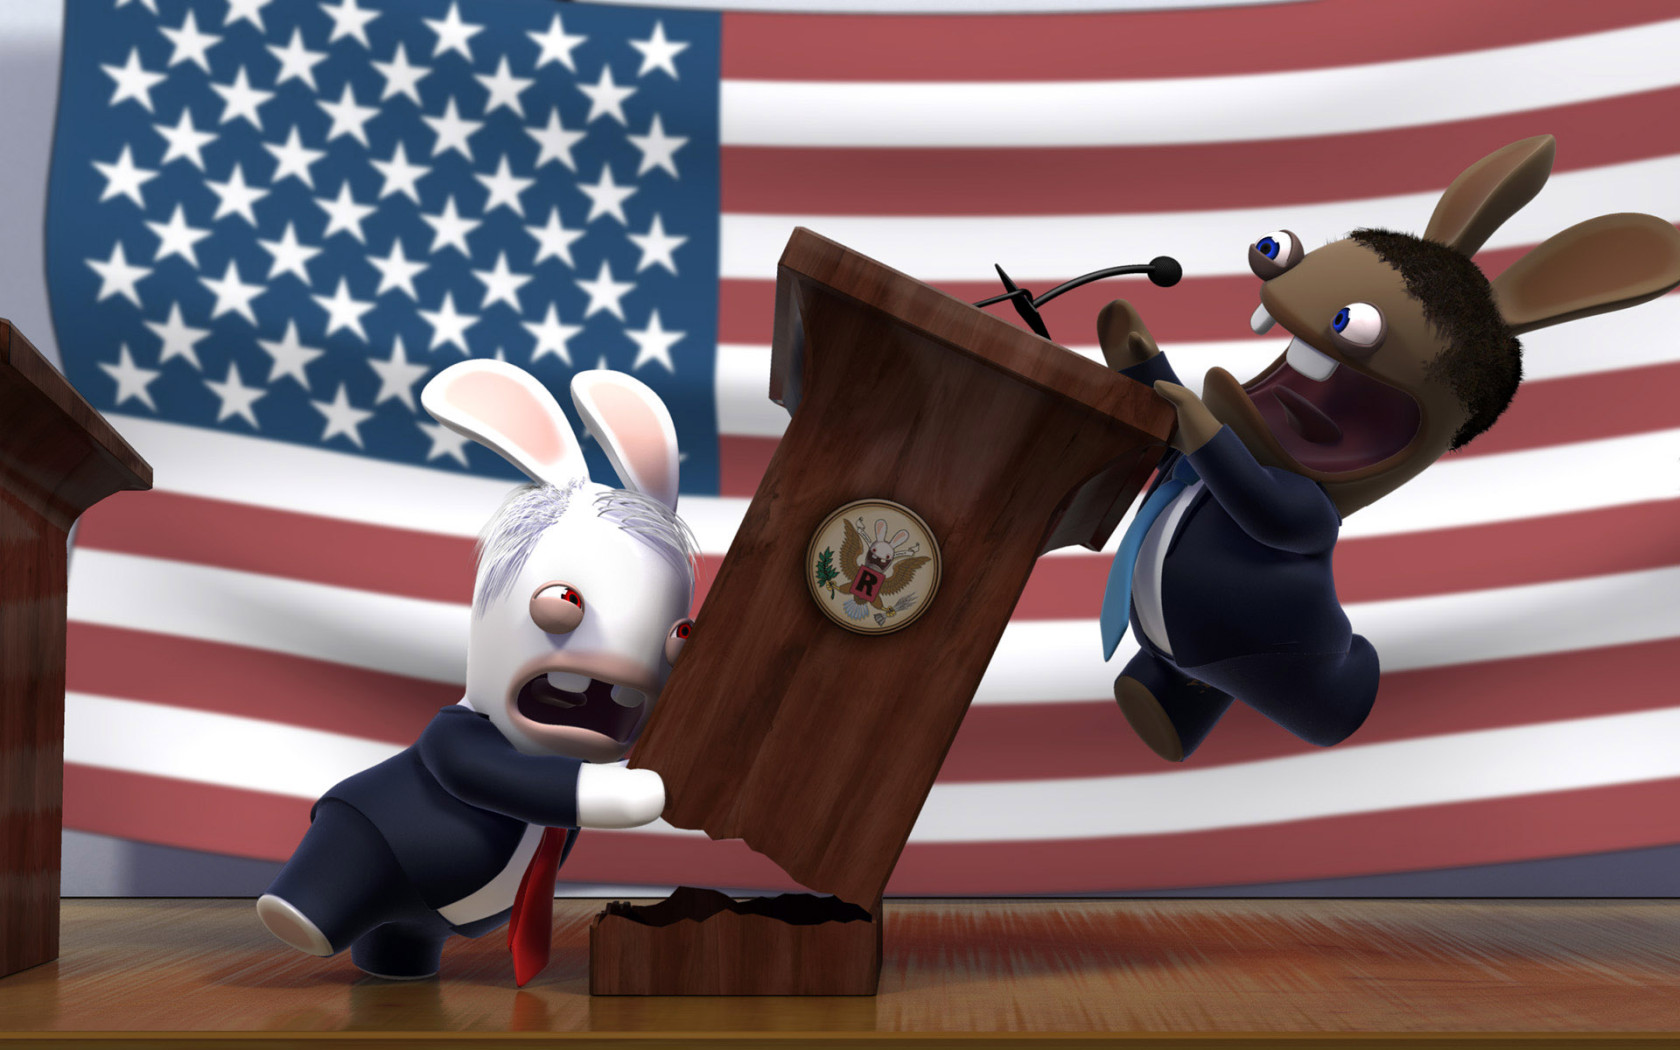 Previous, Funny wallpapers - Rabbit McCain and Obama wallpaper